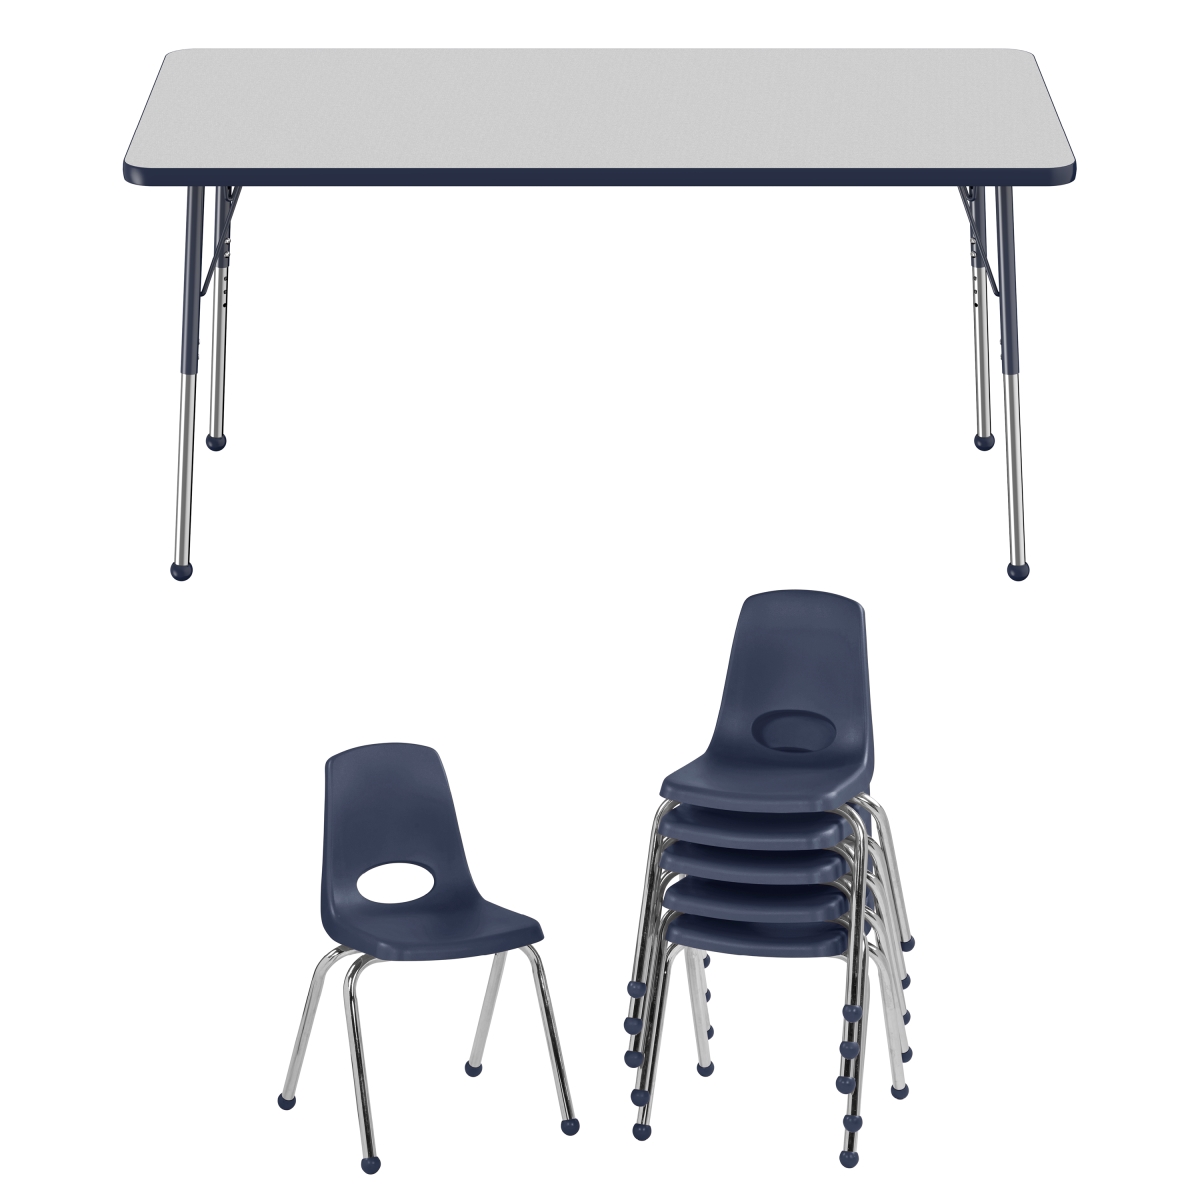 10301-gynv 30 X 60 In. Rectangle T-mold Adjustable Activity Table Standard Ball With 6 Stack Chairs 16 In. Ball Glide - Grey & Navy